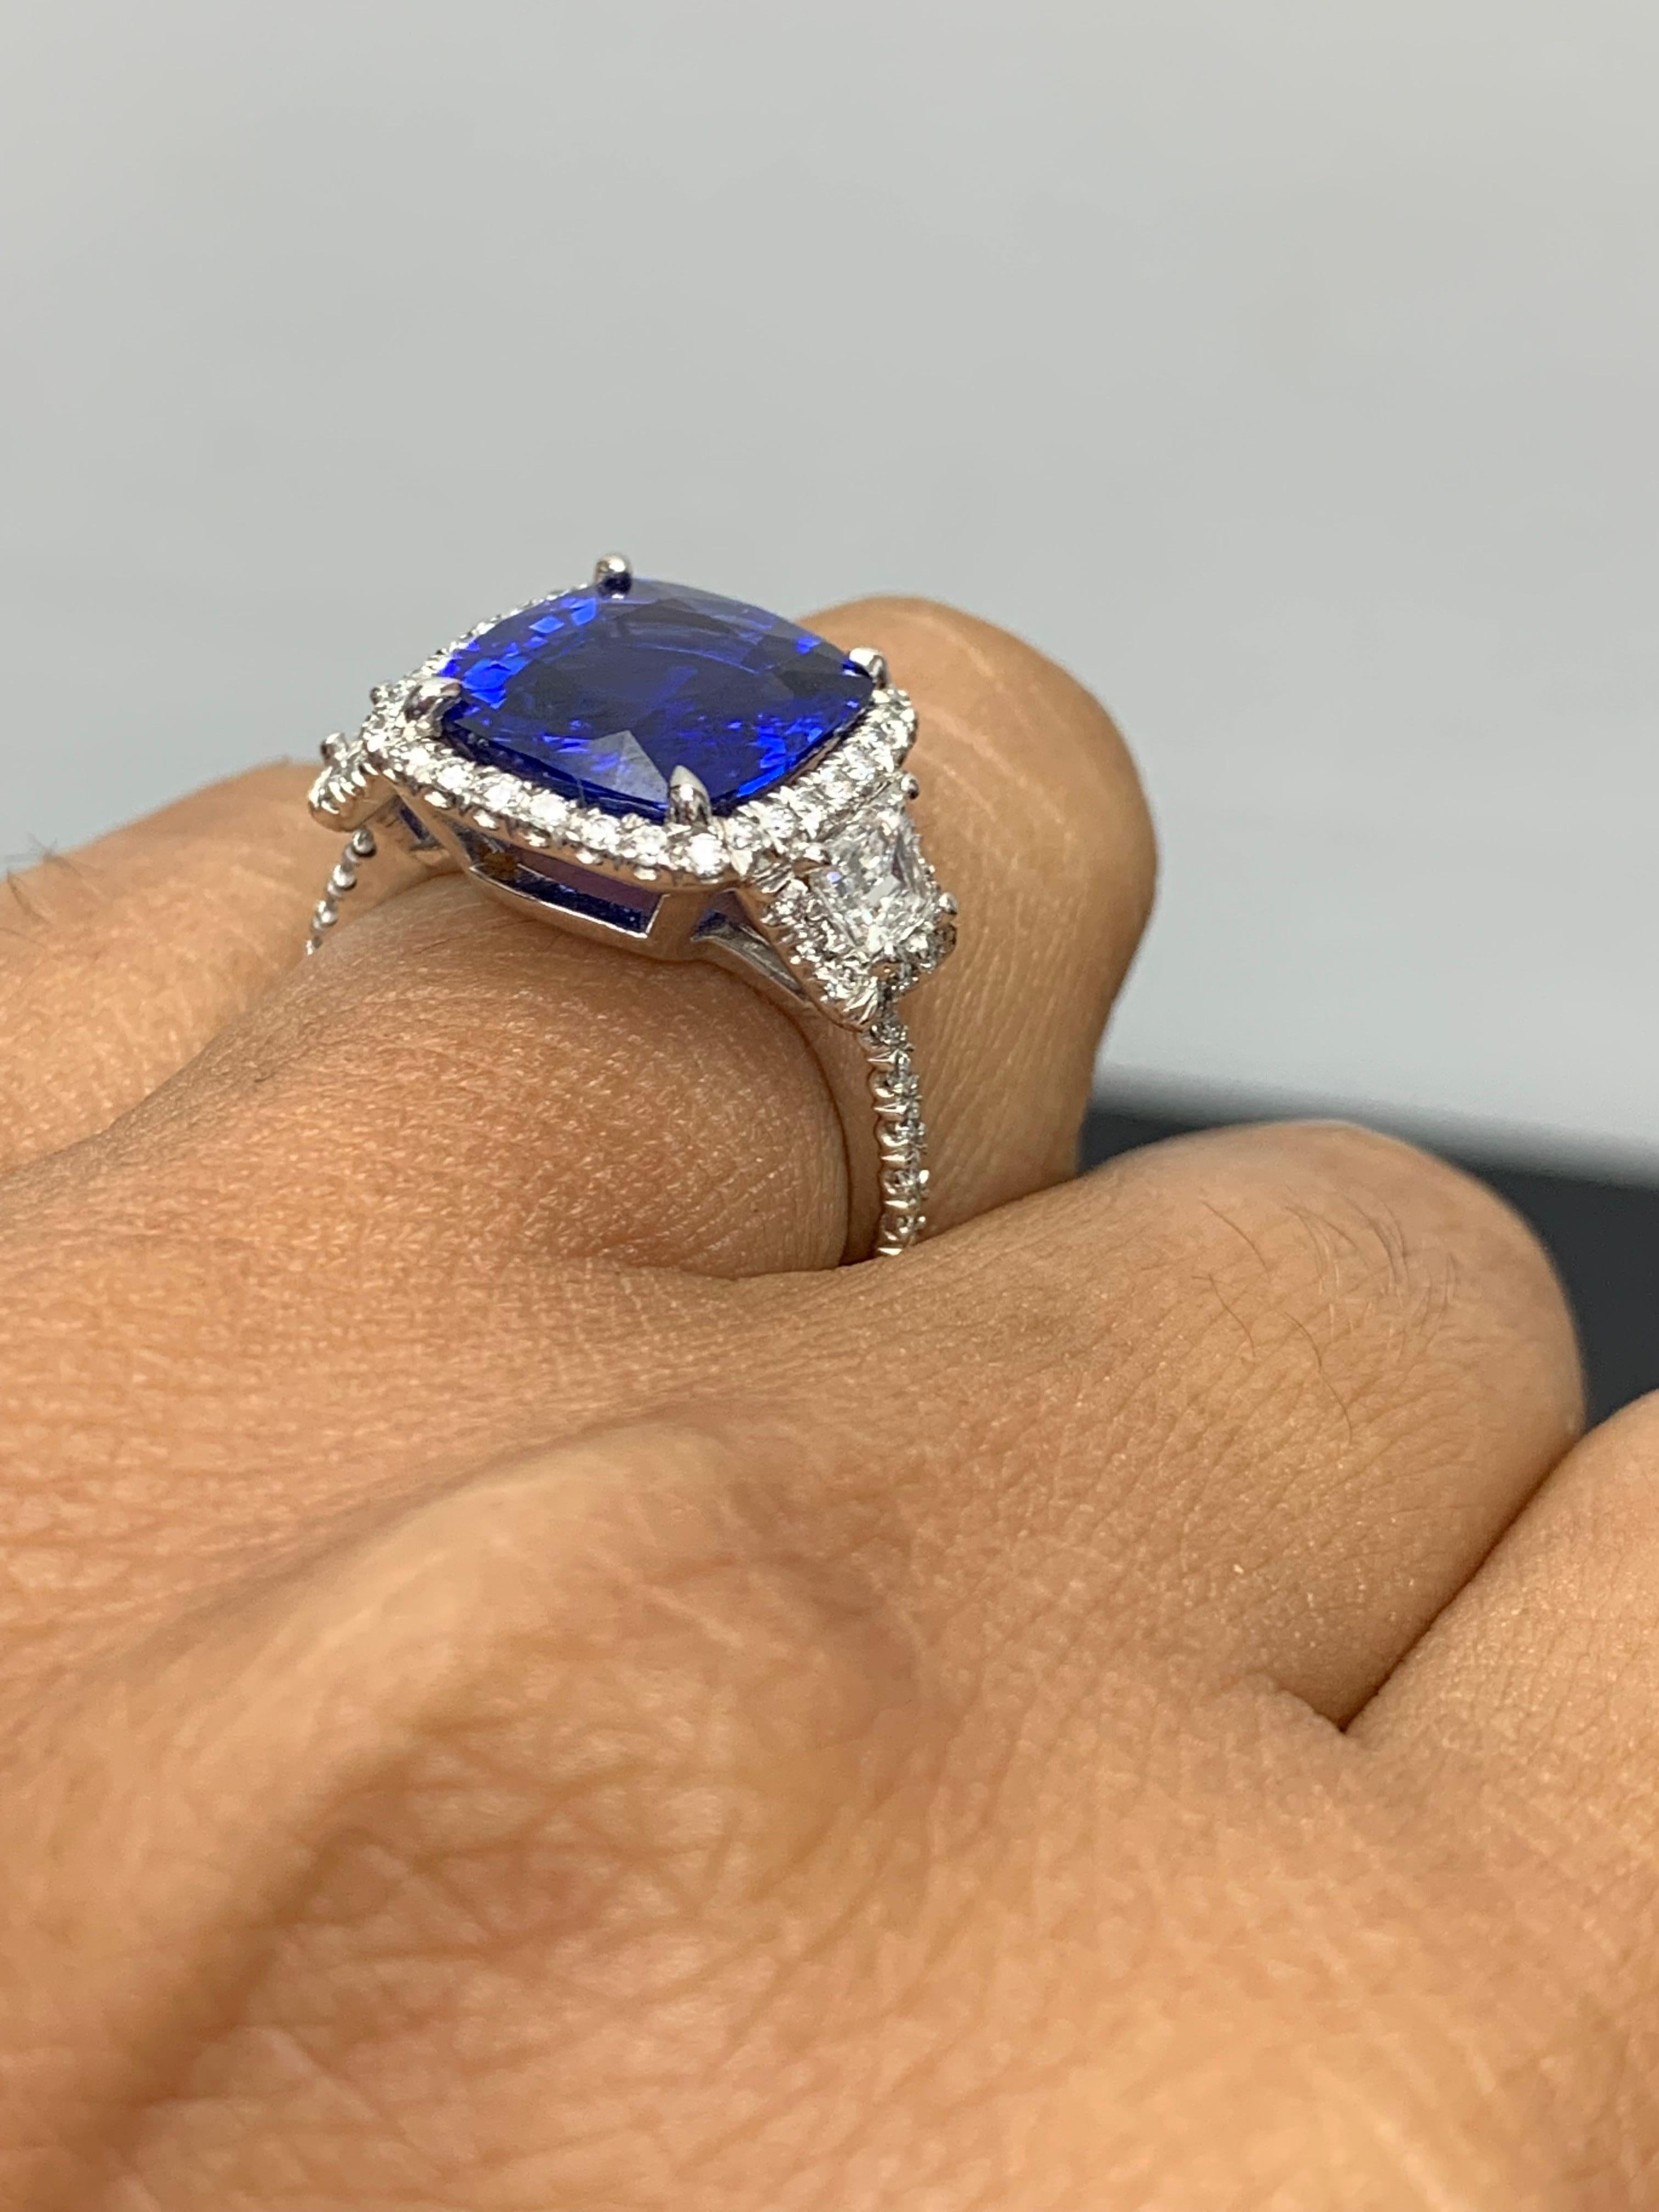 Women's or Men's Certified 5.76 Carat Cushion Cut Sapphire Diamond 3 Stone Ring in Platinum For Sale